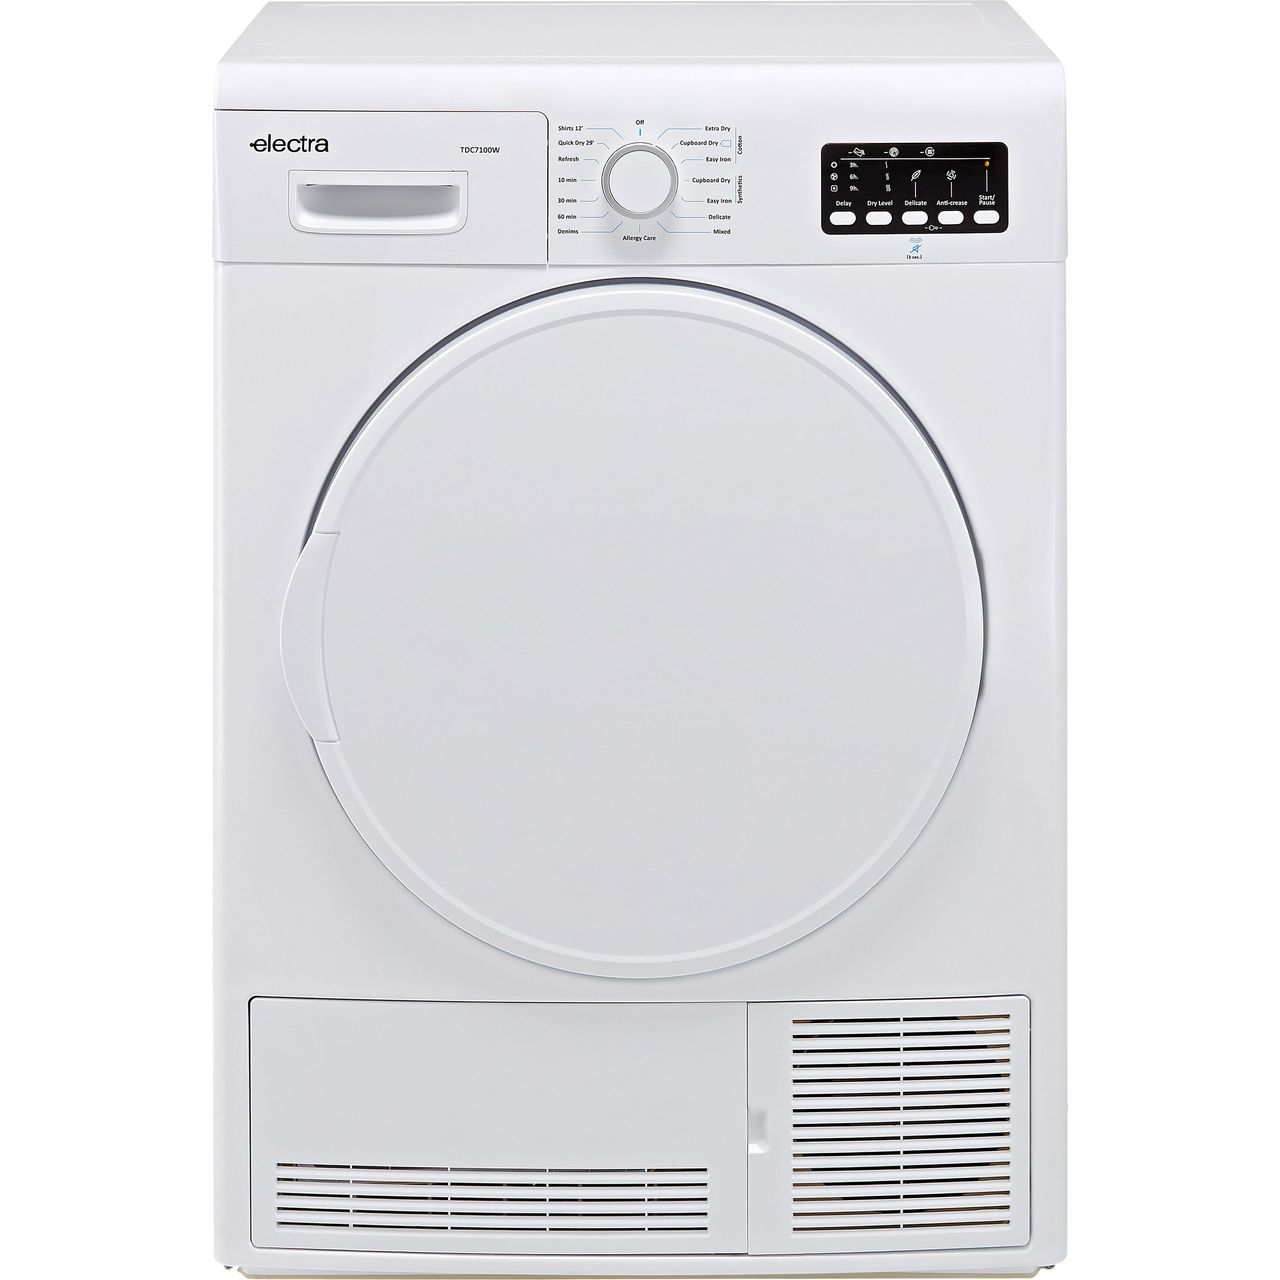 Electra TDC7100W 7Kg Condenser Tumble Dryer Review